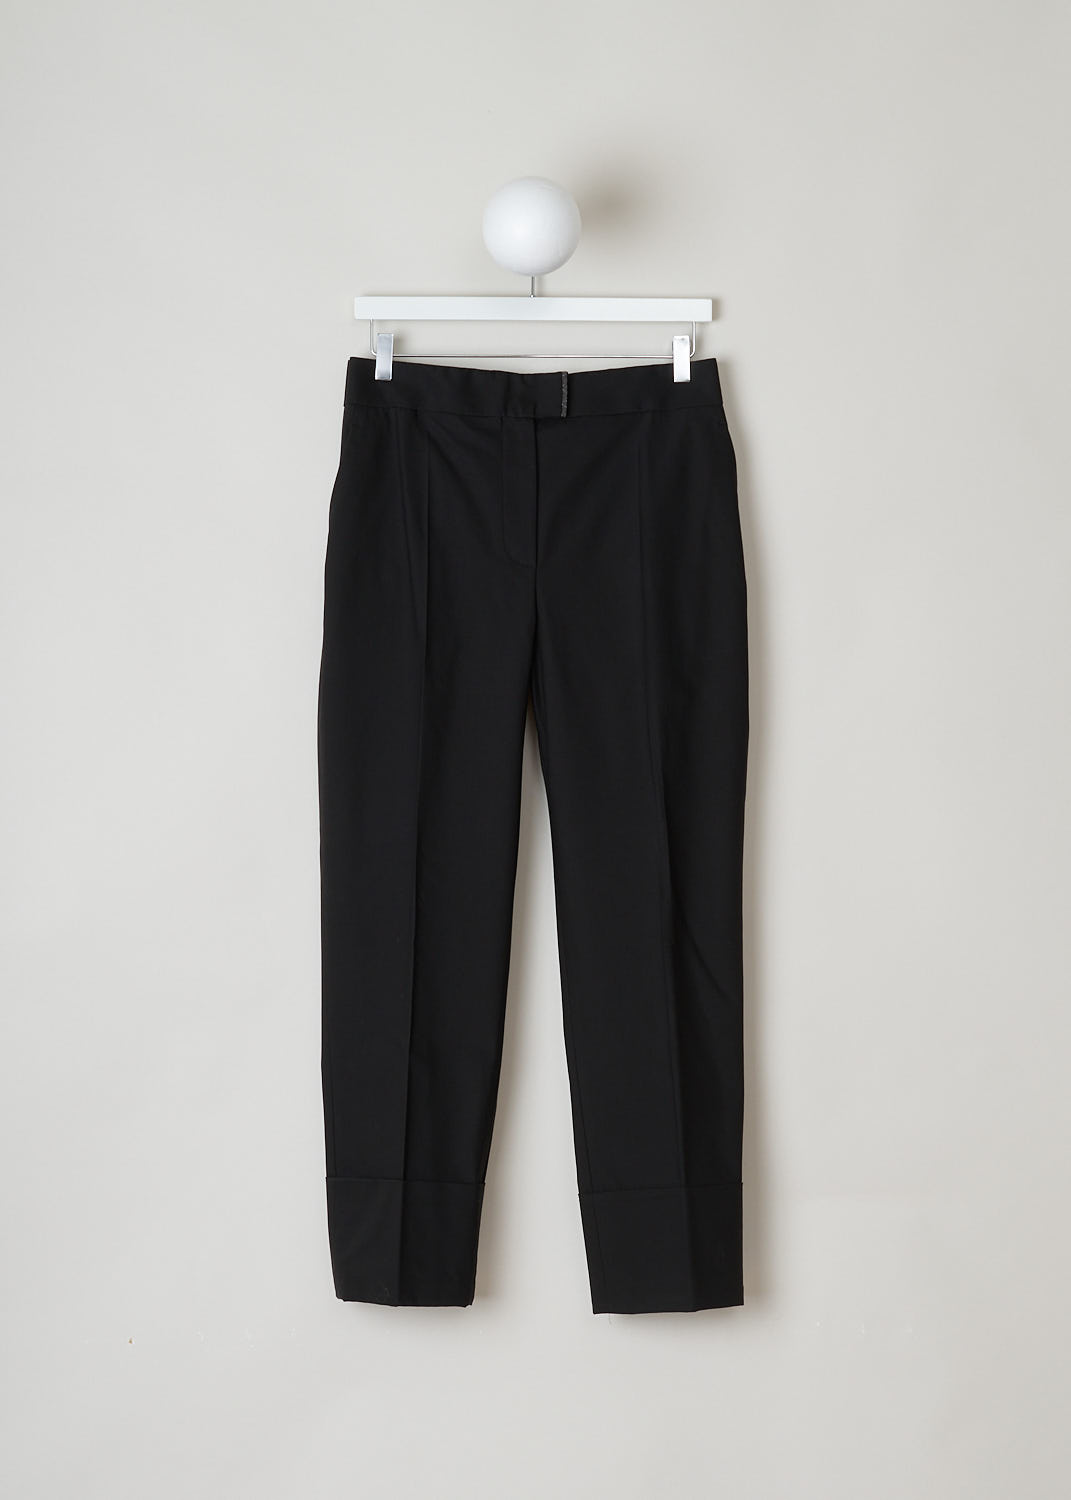 BRUNELLO CUCINELLI, BLACK PANTS WITH BEADED CLASP DETAIL, M0F70P70_C101, Black, Front, This beautiful black pants comes with an elastic waistband. It has a concealed zipper and clasp, adorned with a subtle beaded detail. The pants has two side slit pockets and two welt pockets on the back. Furthermore, the hem is finished with a broad fold-over.